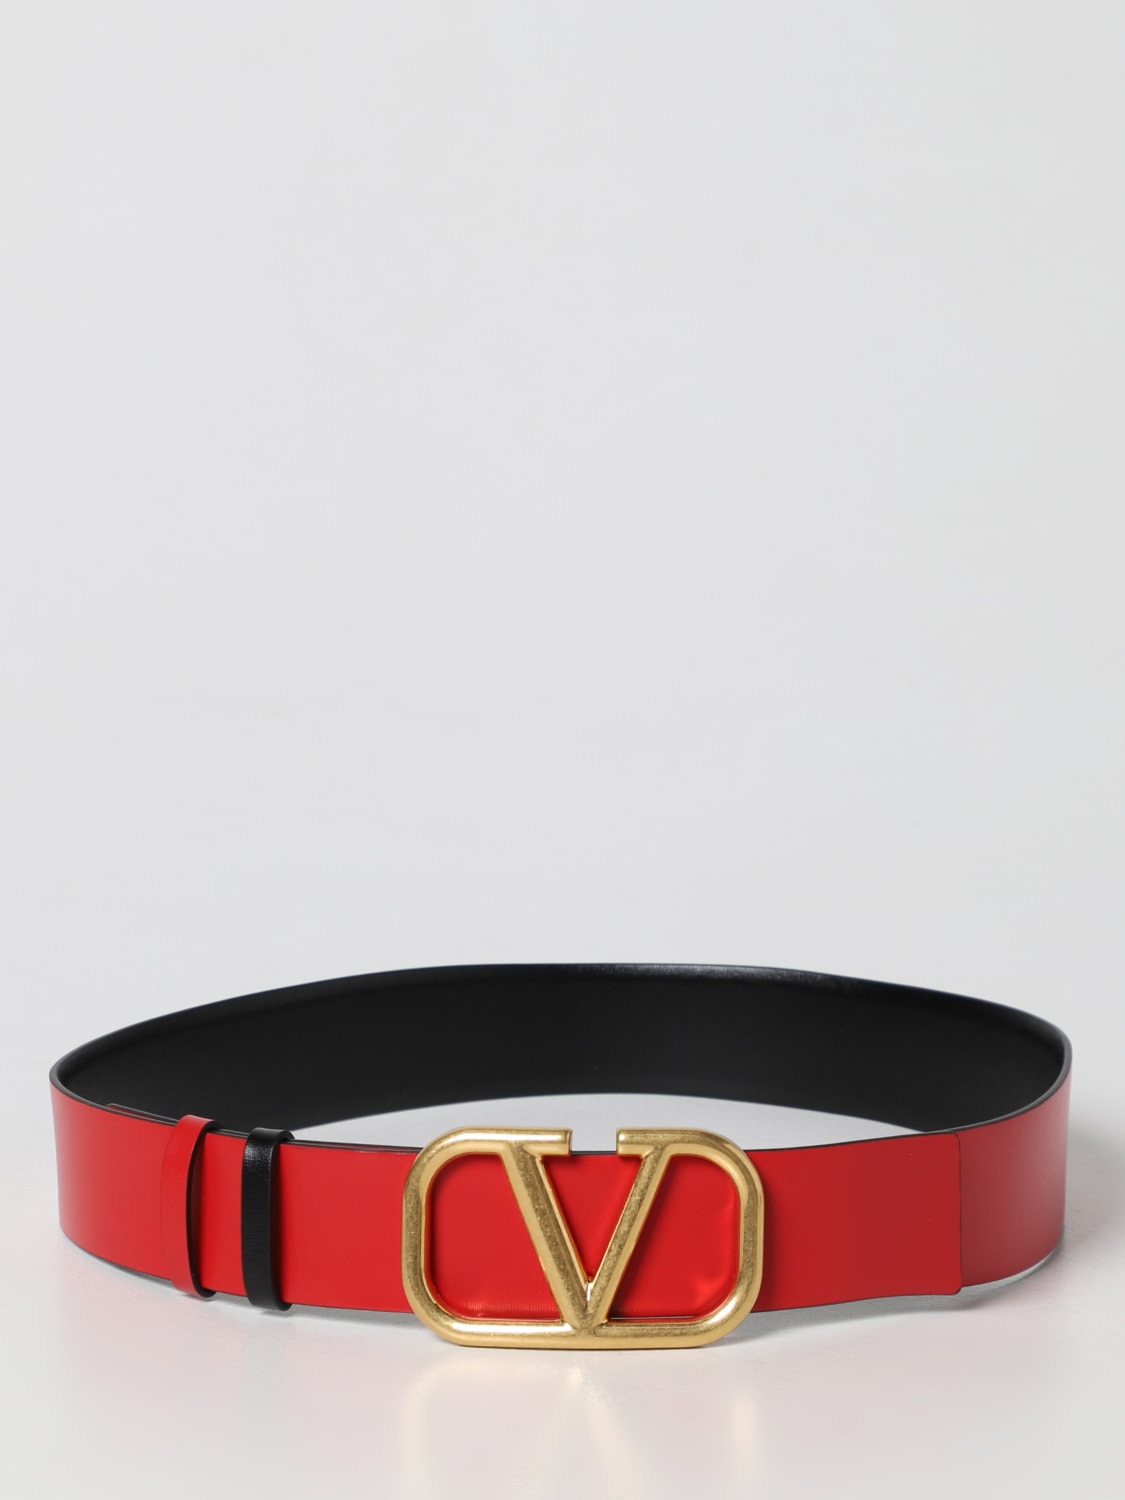 Reversible Belt Man or Woman Luxury in Leather Red & Black